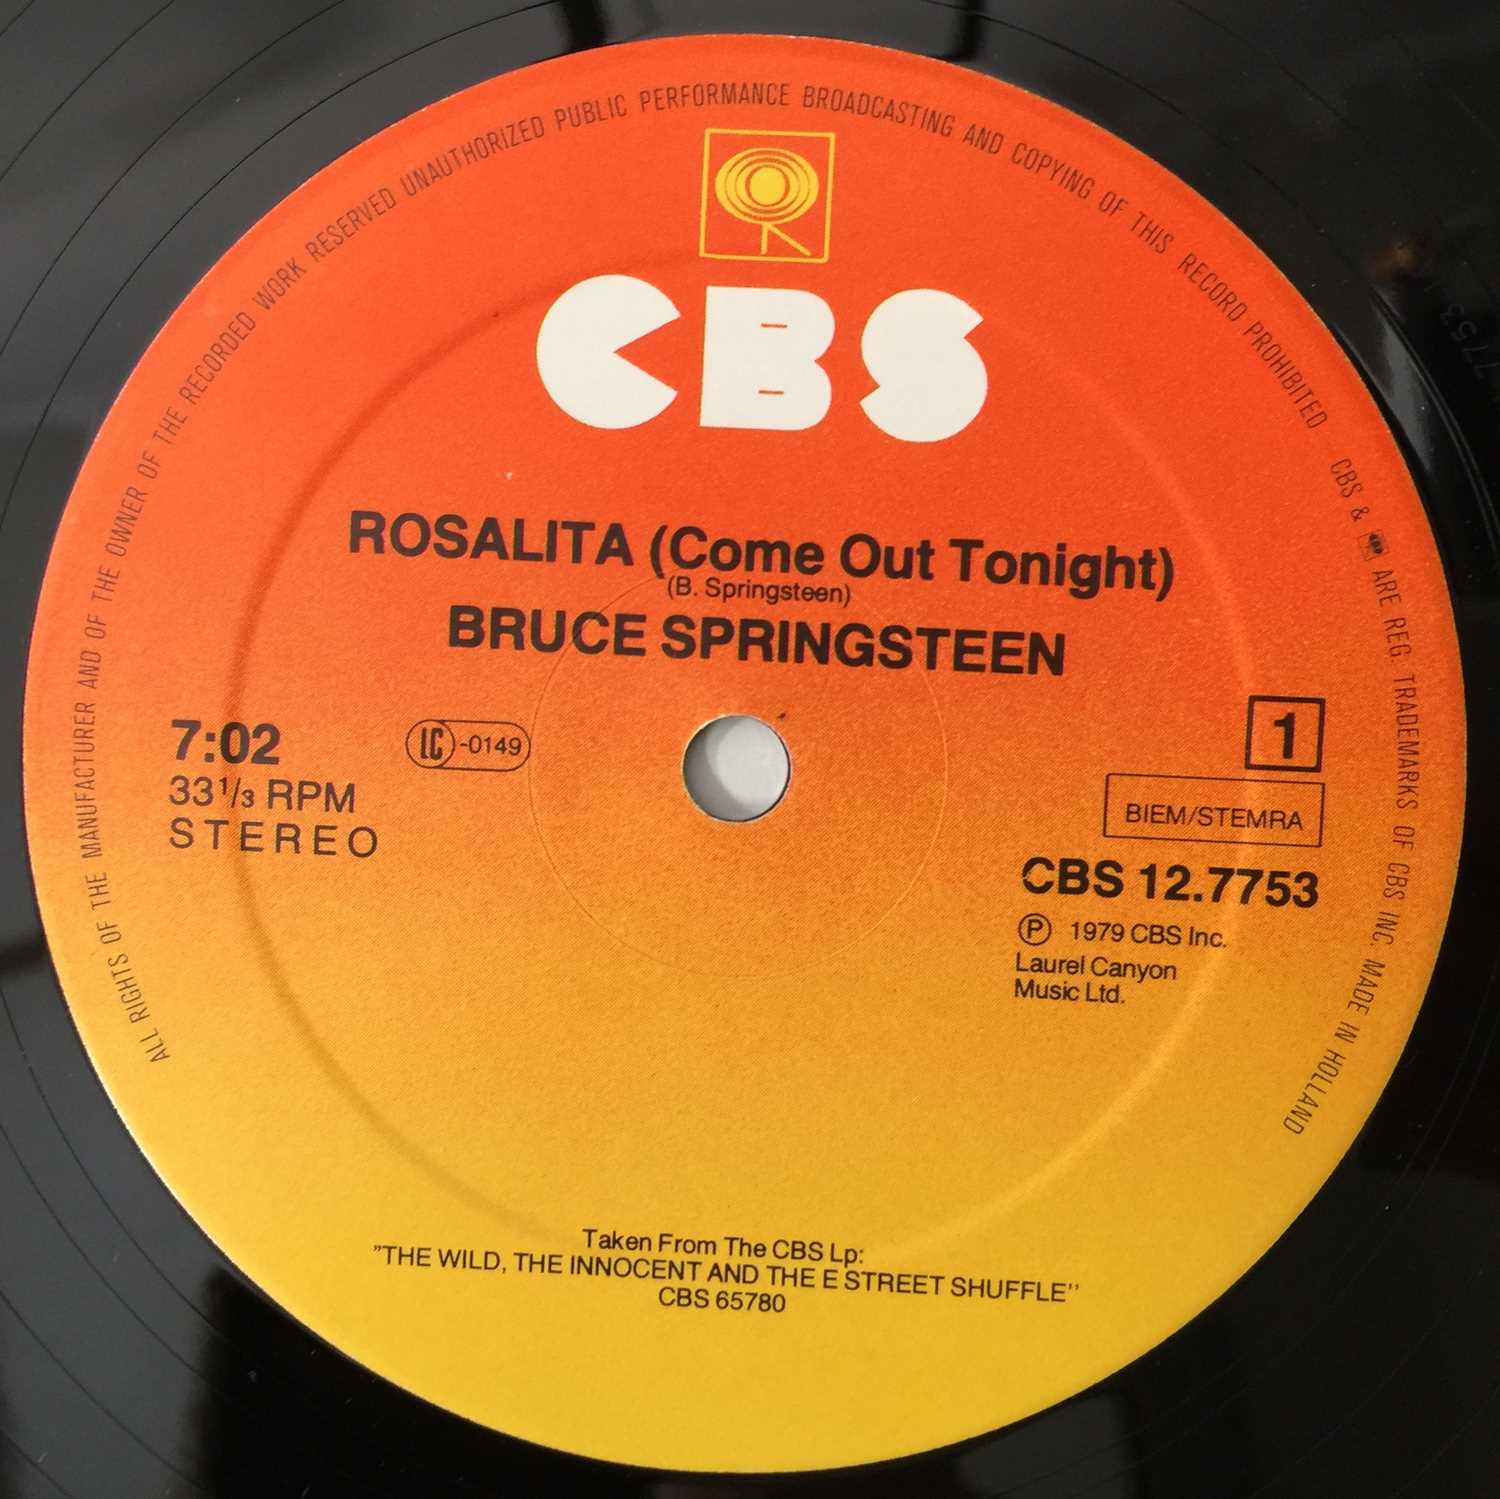 BRUCE SPRINGSTEEN - ROSALITA (COME OUT TONIGHT) 12" MAXI (COMPLETE ORIGINAL EU COPY WITH POSTER - CB - Image 5 of 6